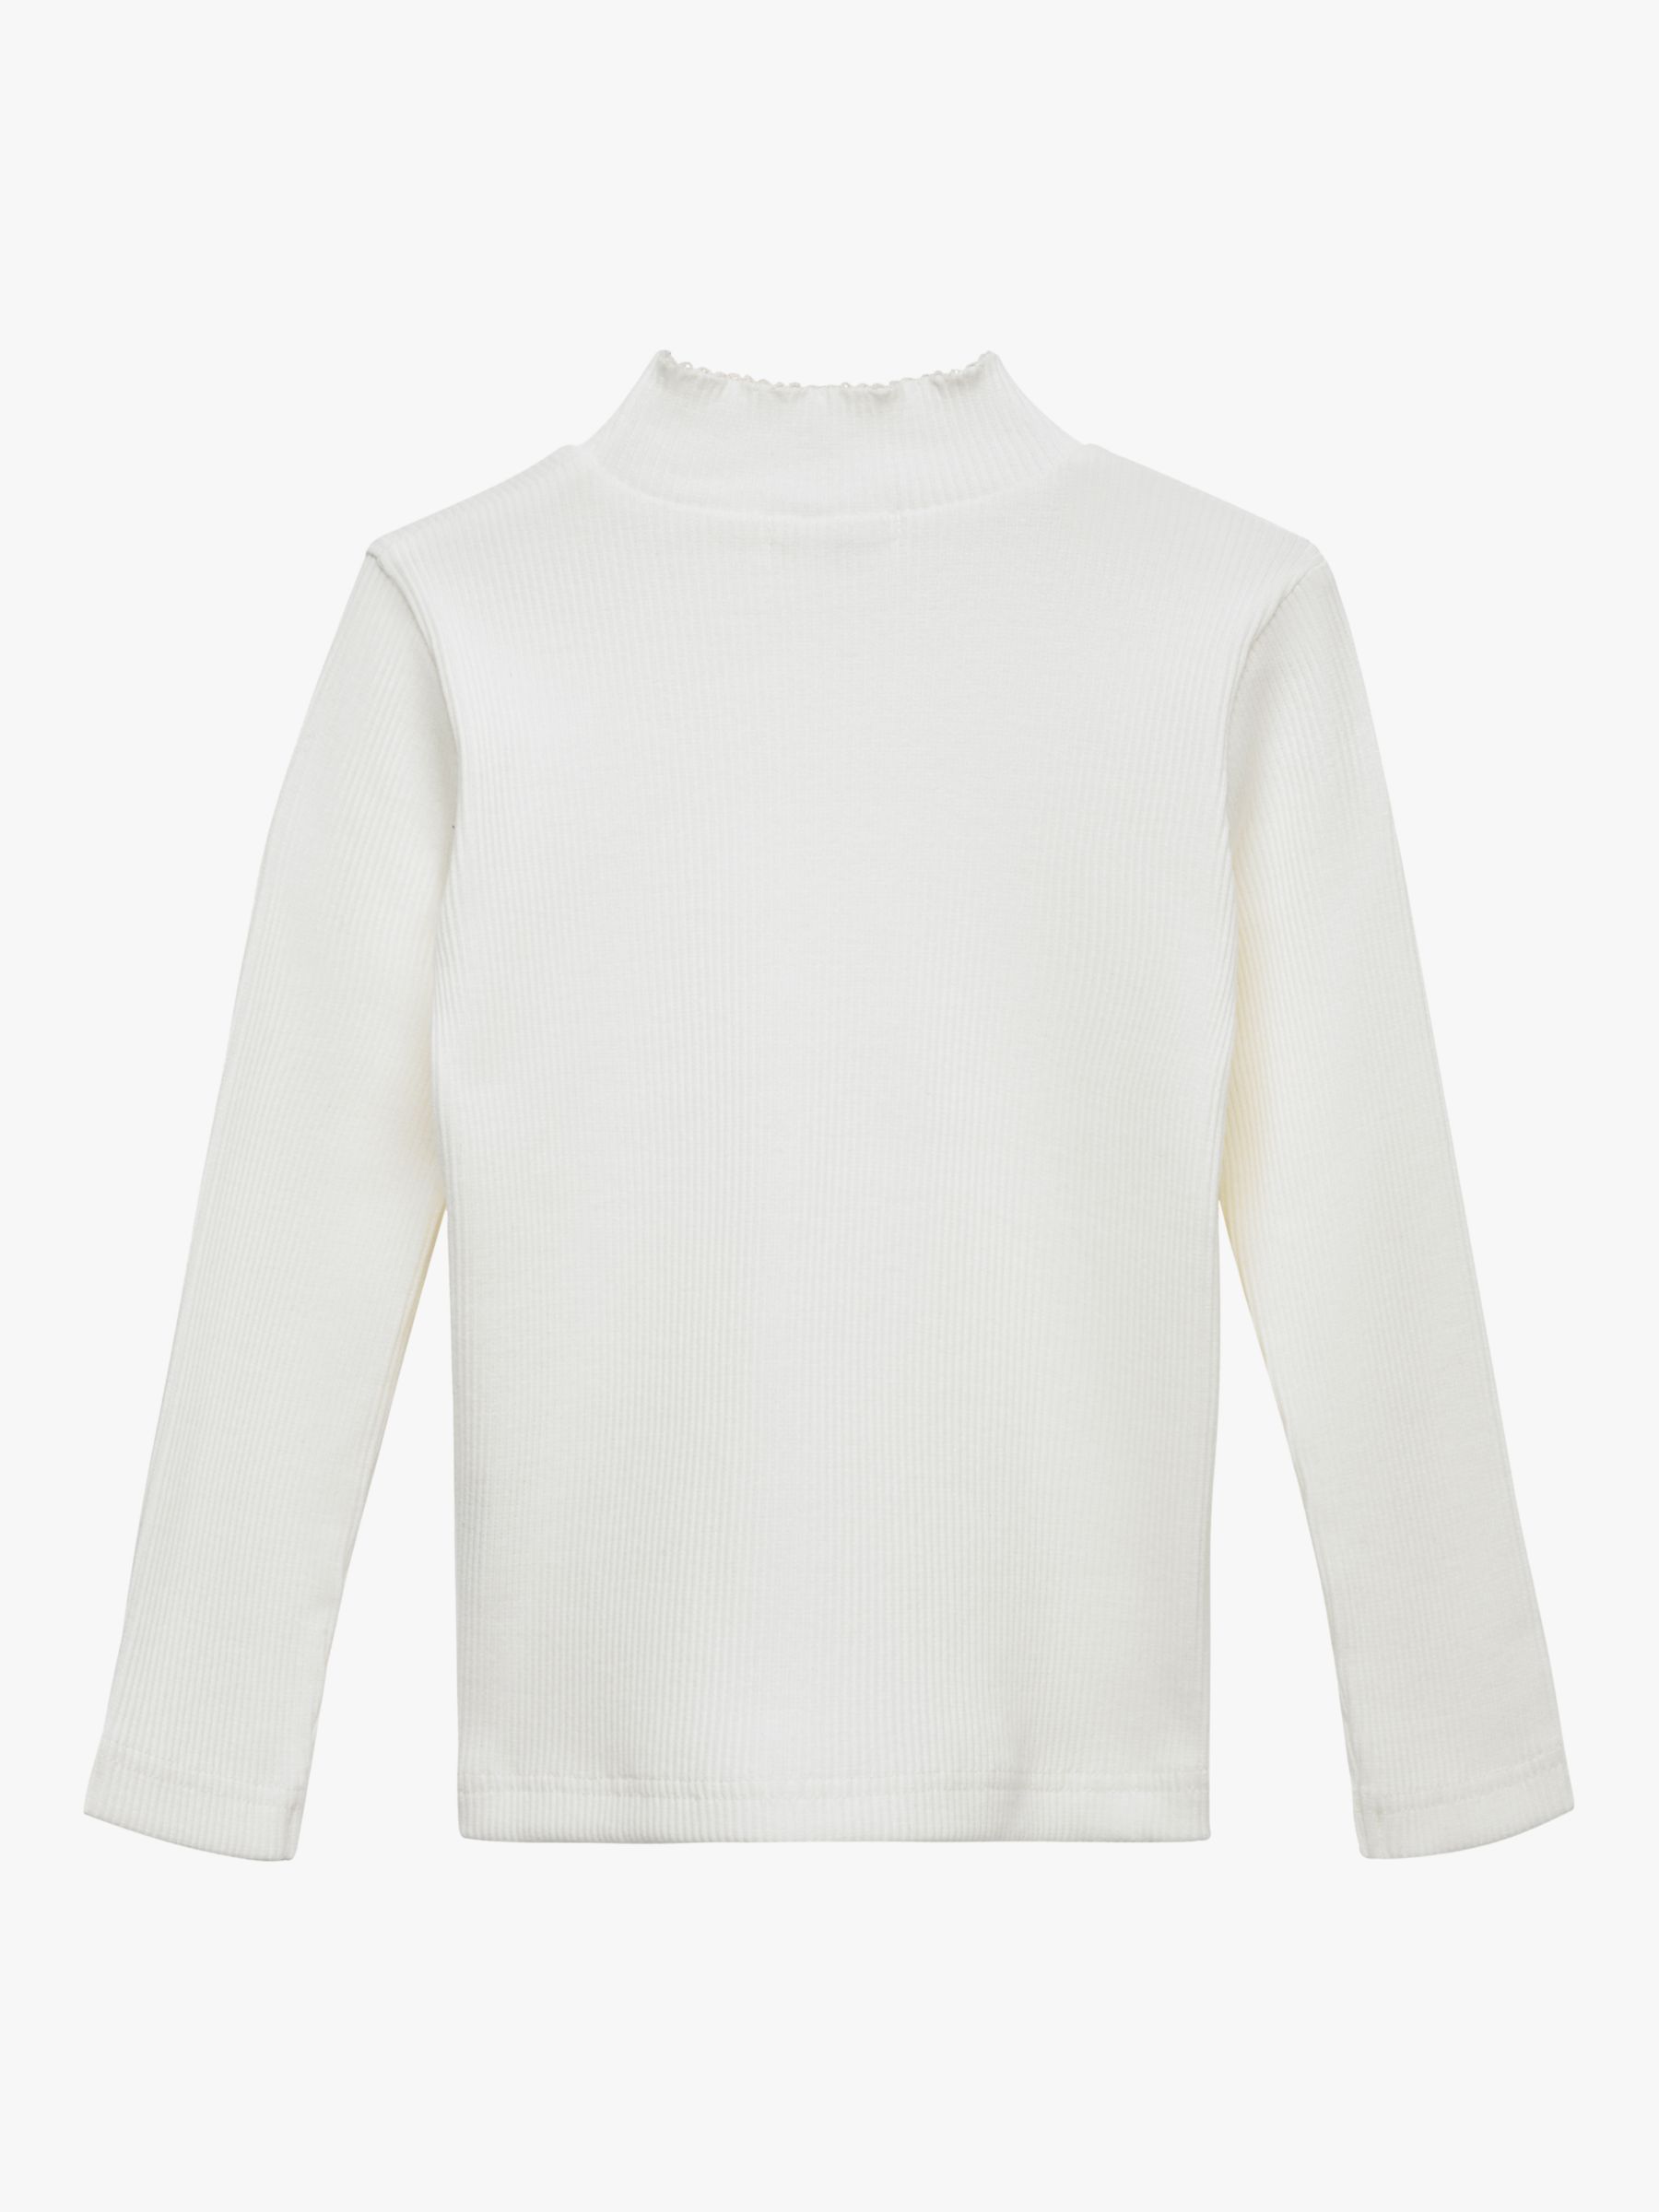 Trotters Kids' Grace Bow Detail Jersey Top, White at John Lewis & Partners